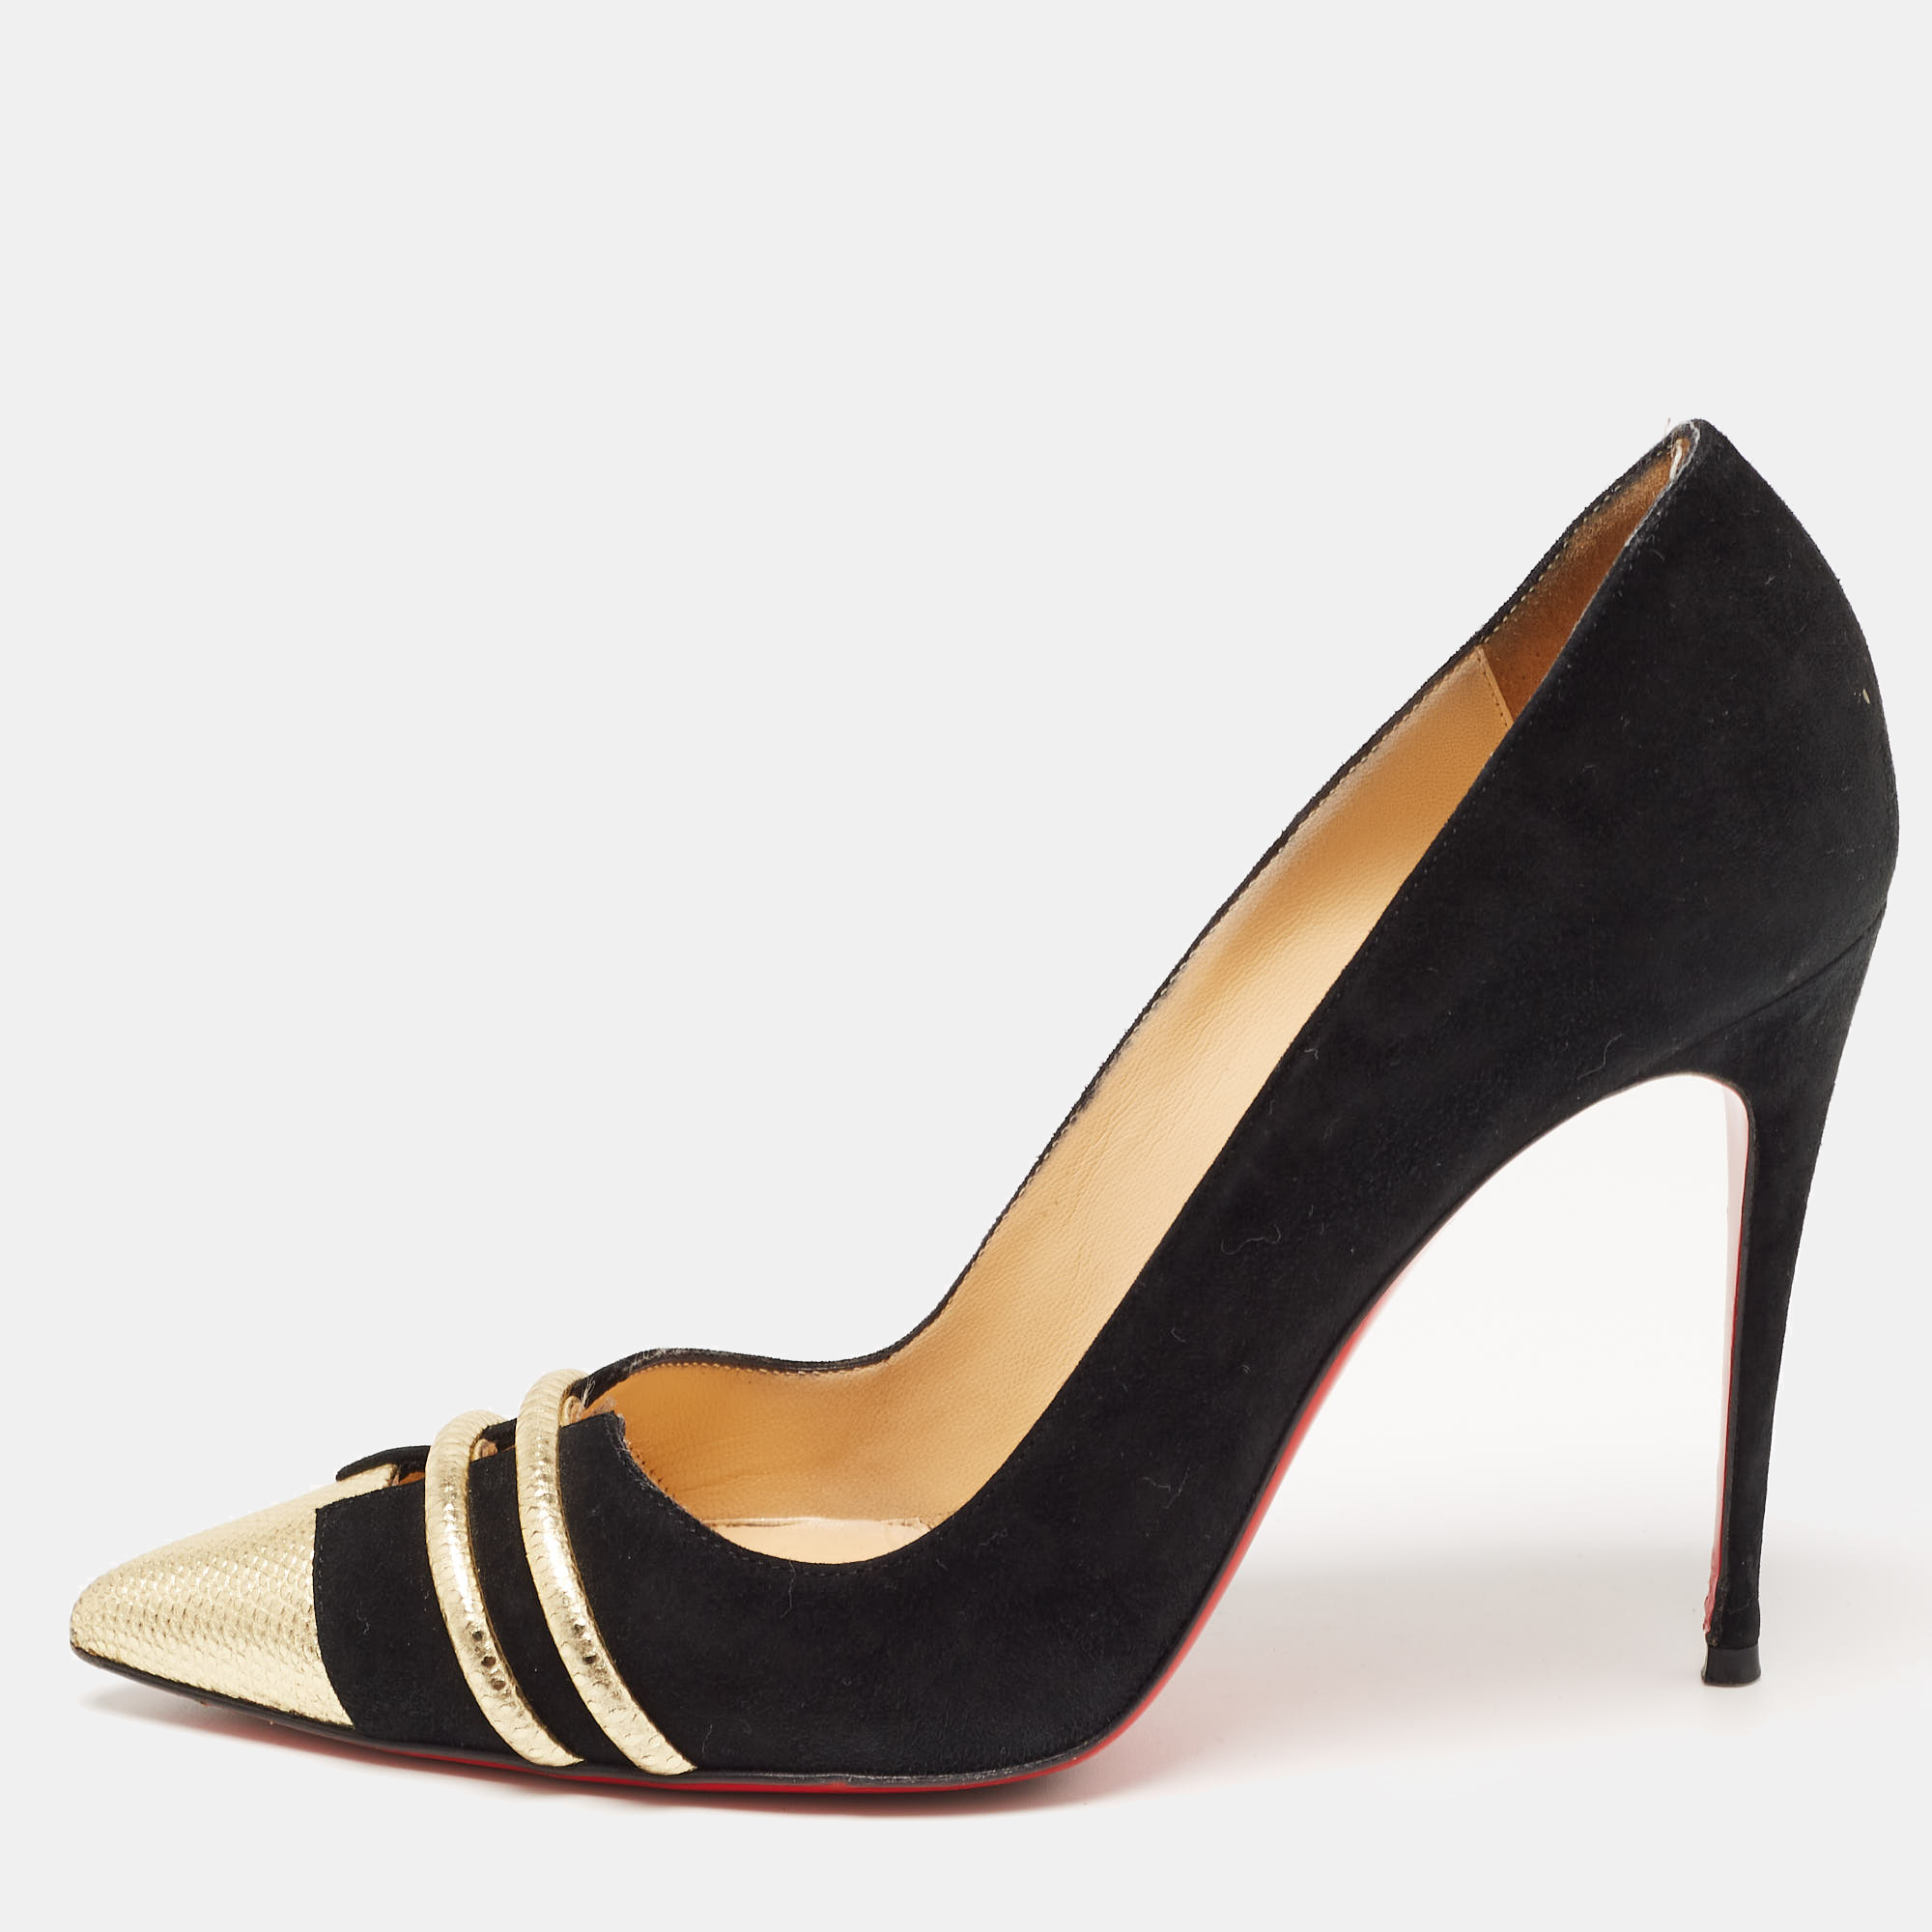 Christian louboutin black/gold suede and leather front double pumps size 38.5